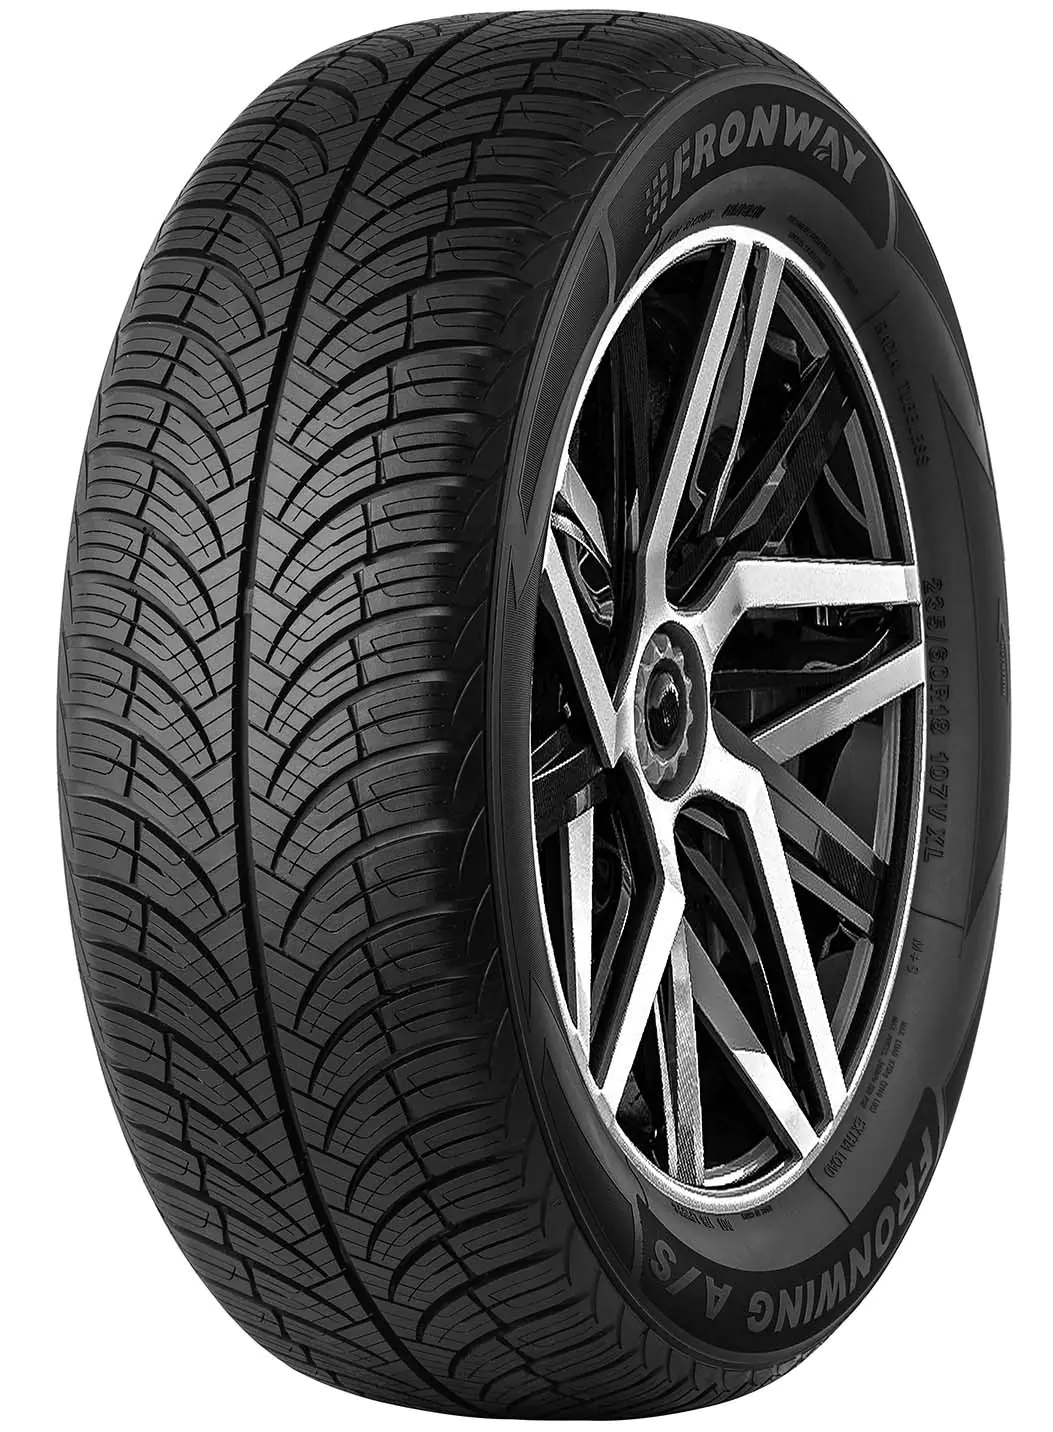 Fronway Fronway 235/40 R18 95W FRONWING A/S XL pneumatici nuovi All Season 